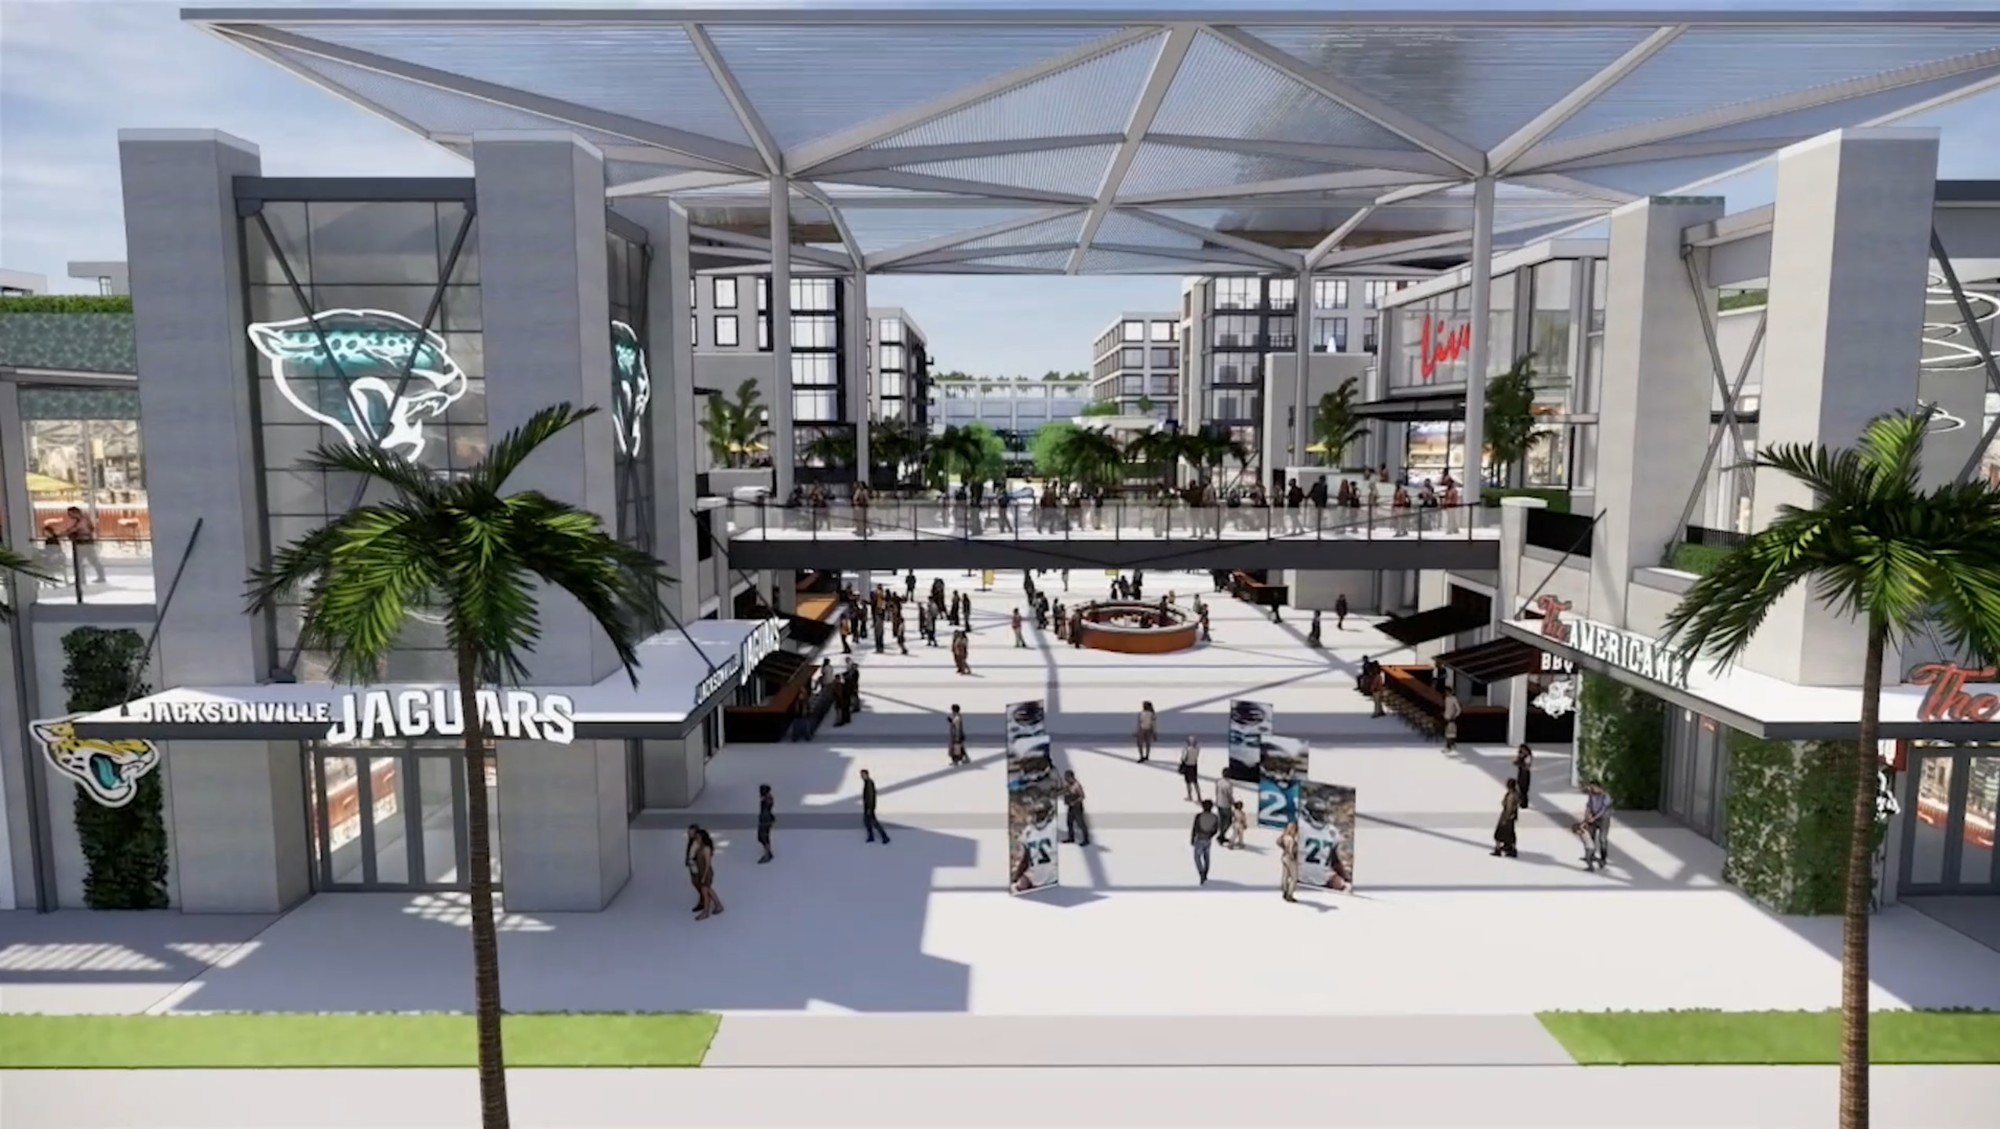 Lot J would bring a city-owned 100,000-square-foot Live! Arena with bars and restaurants.